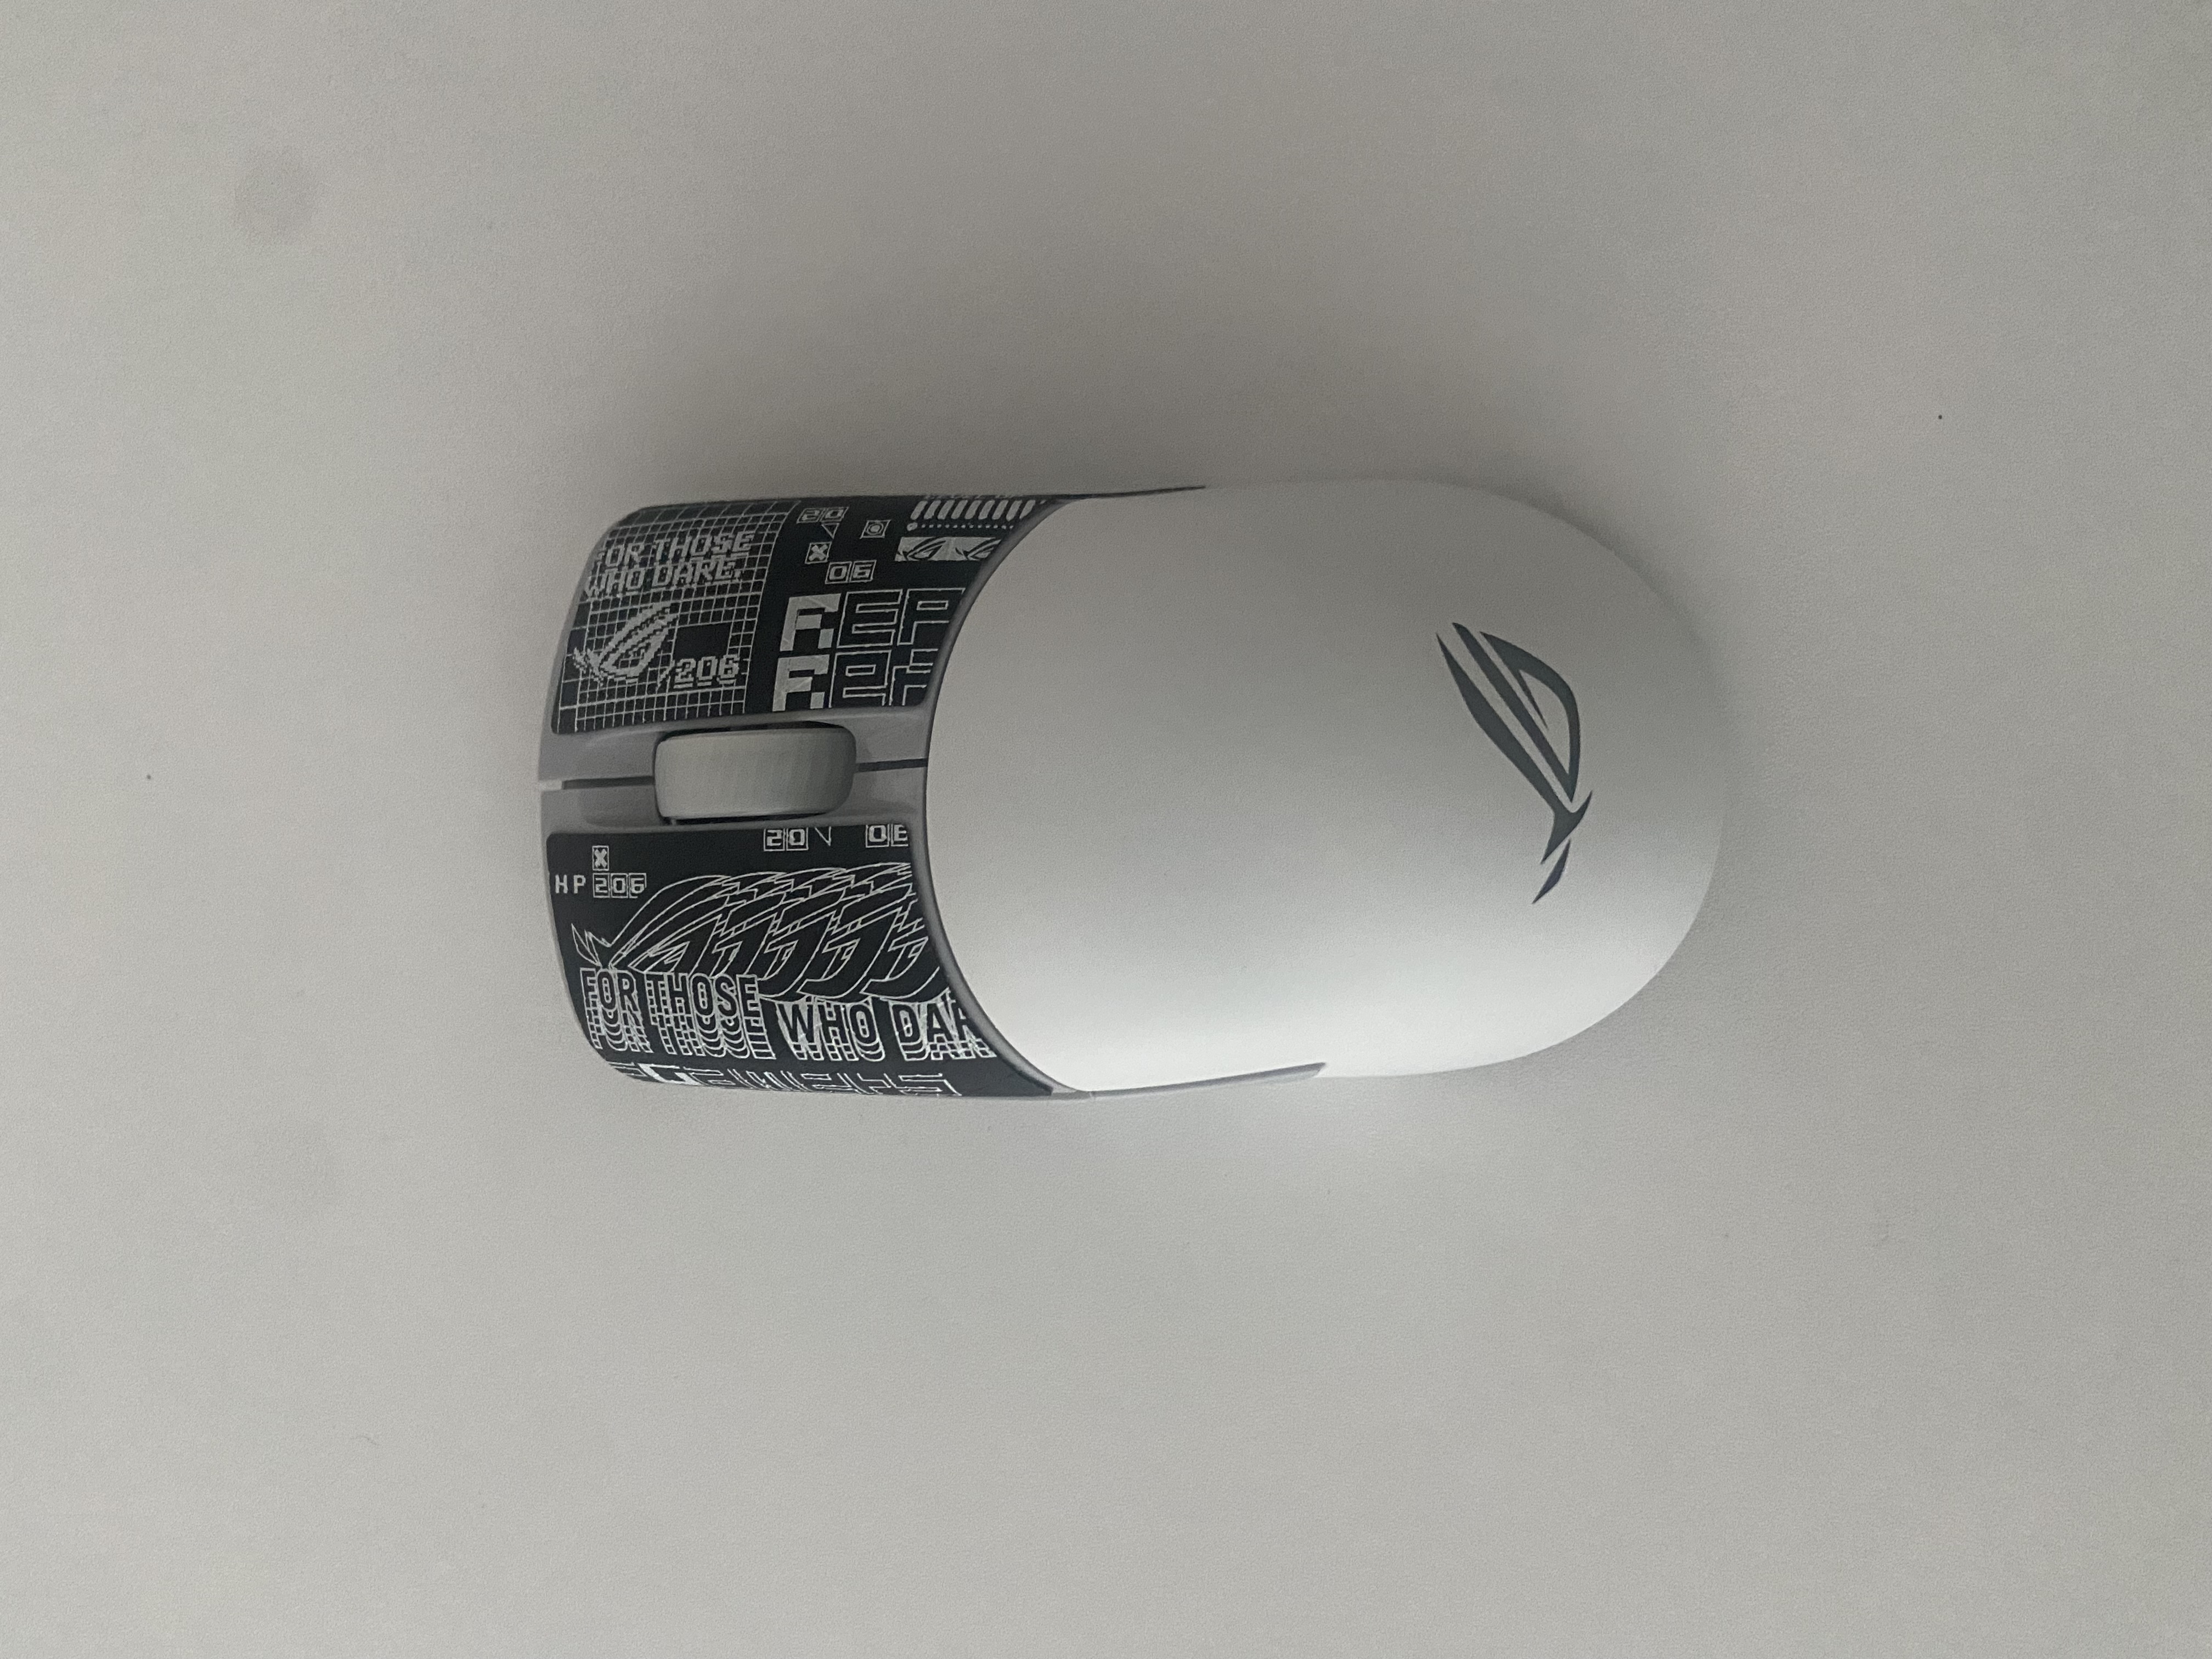 asus keris aimpoint 무선 white